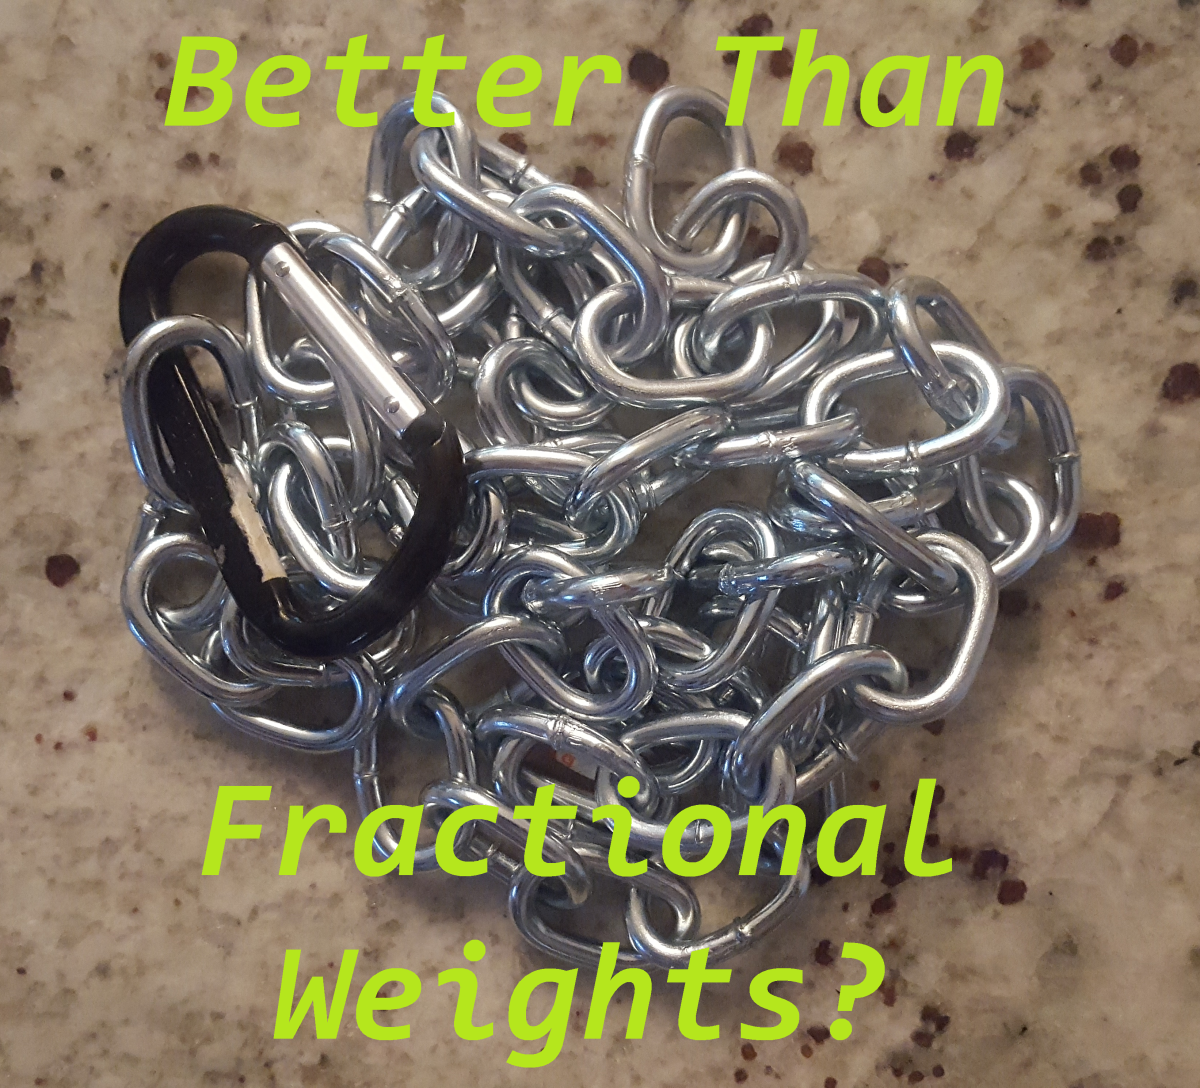 Better than fractional weights for microloading?